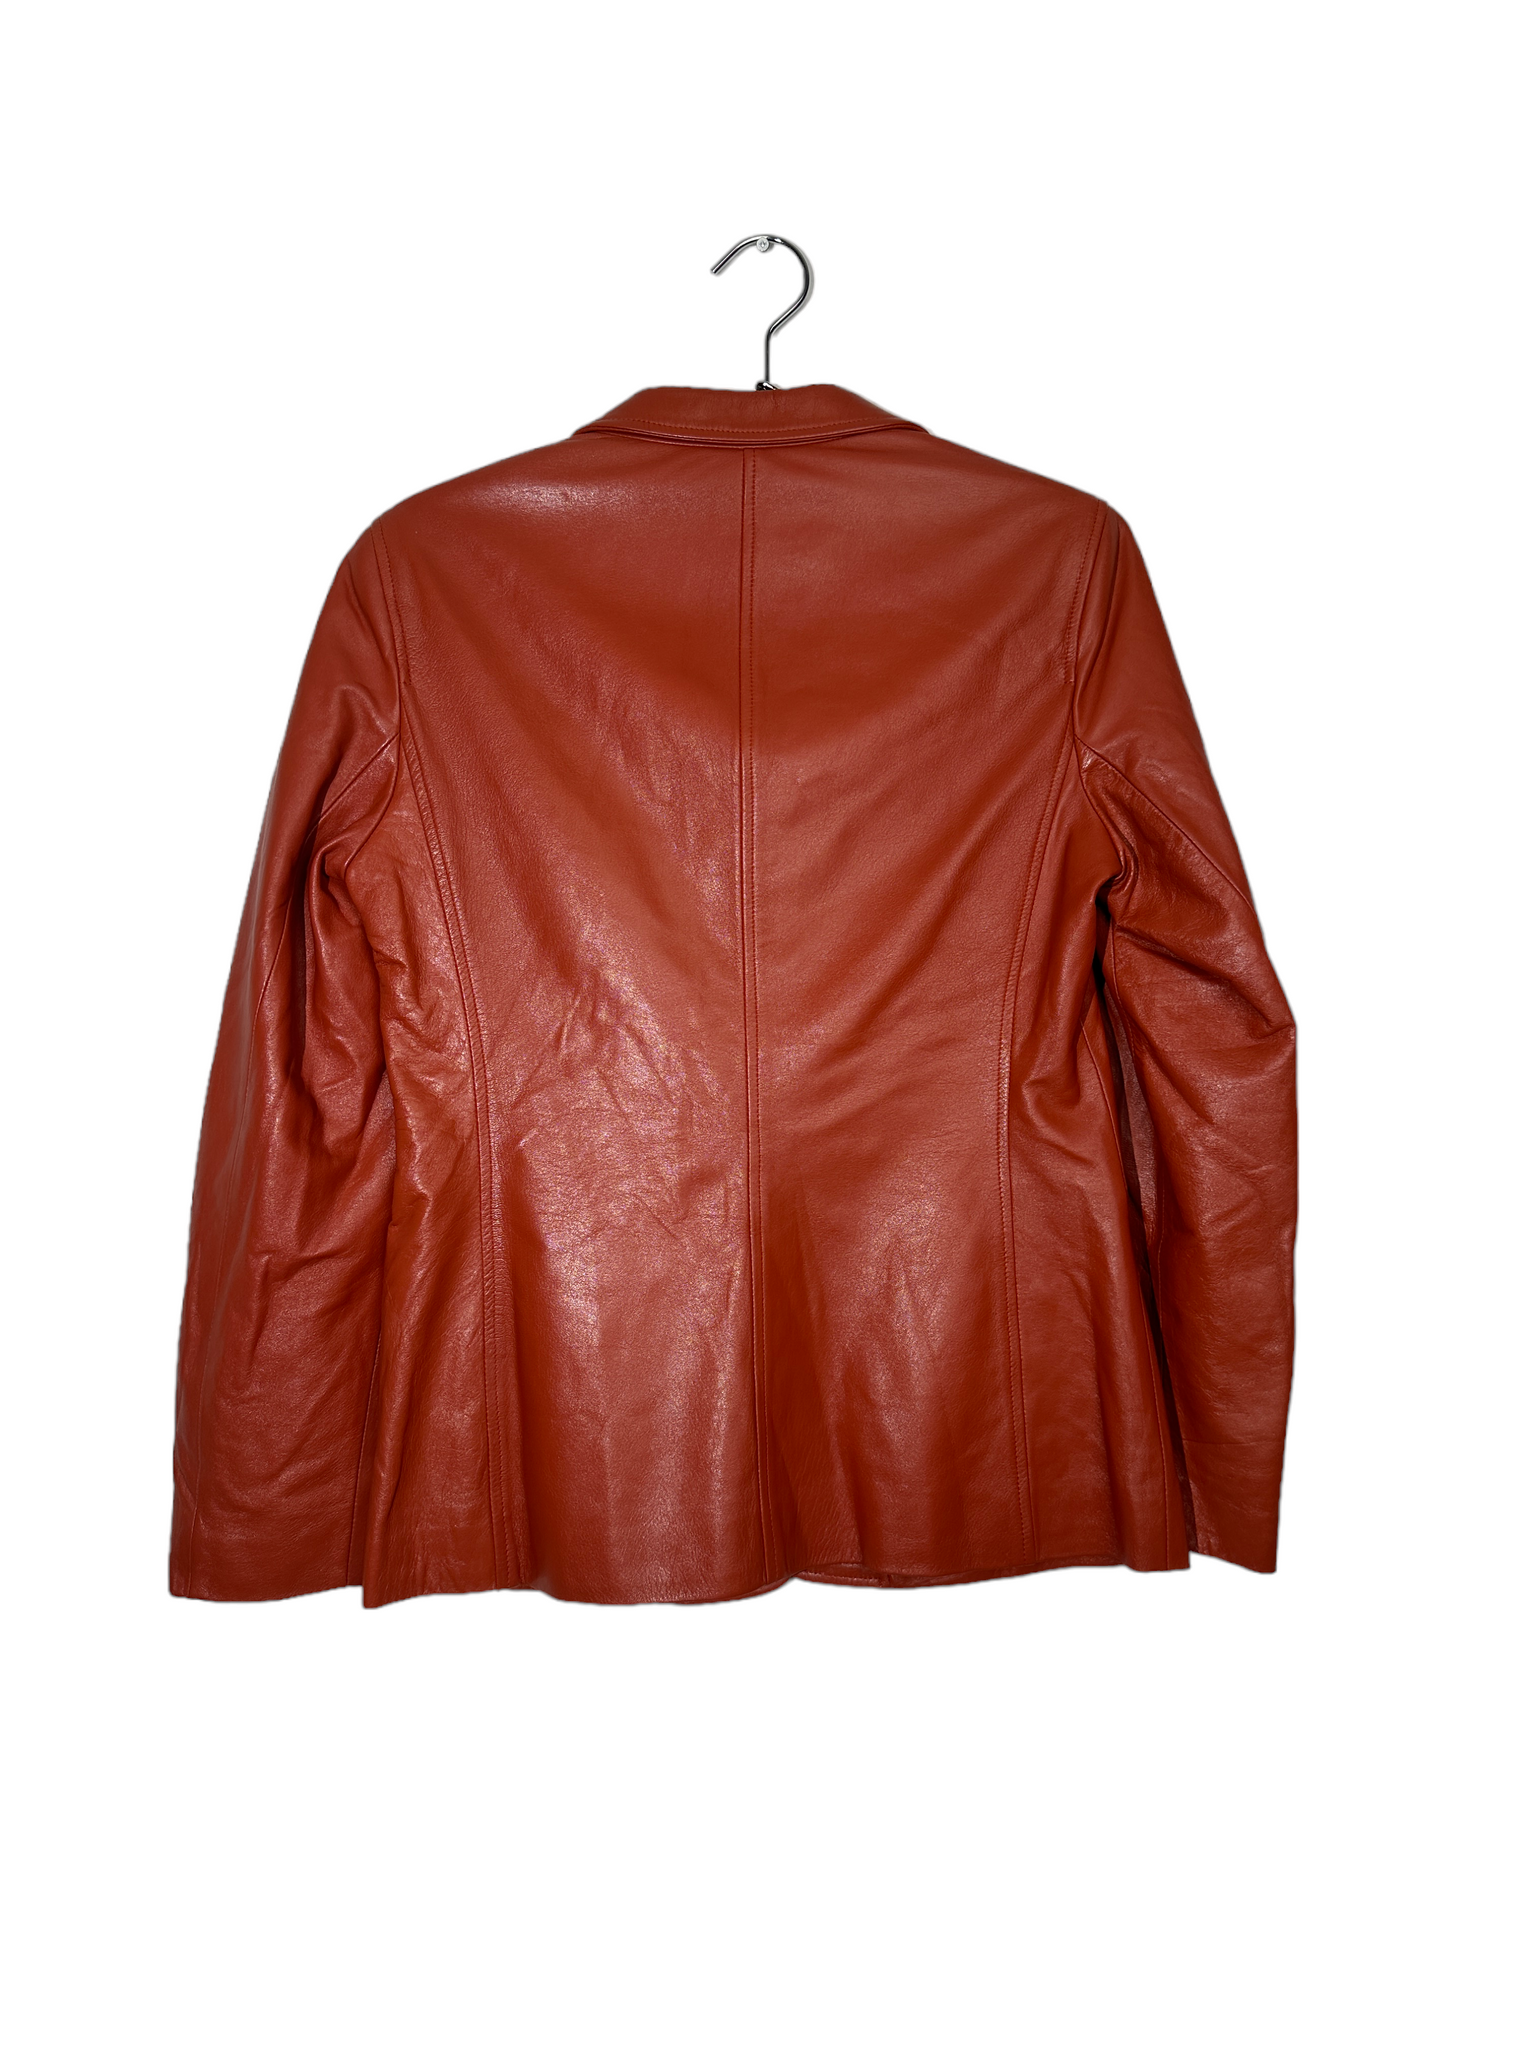 Terracota Buttoned Leather Jacket